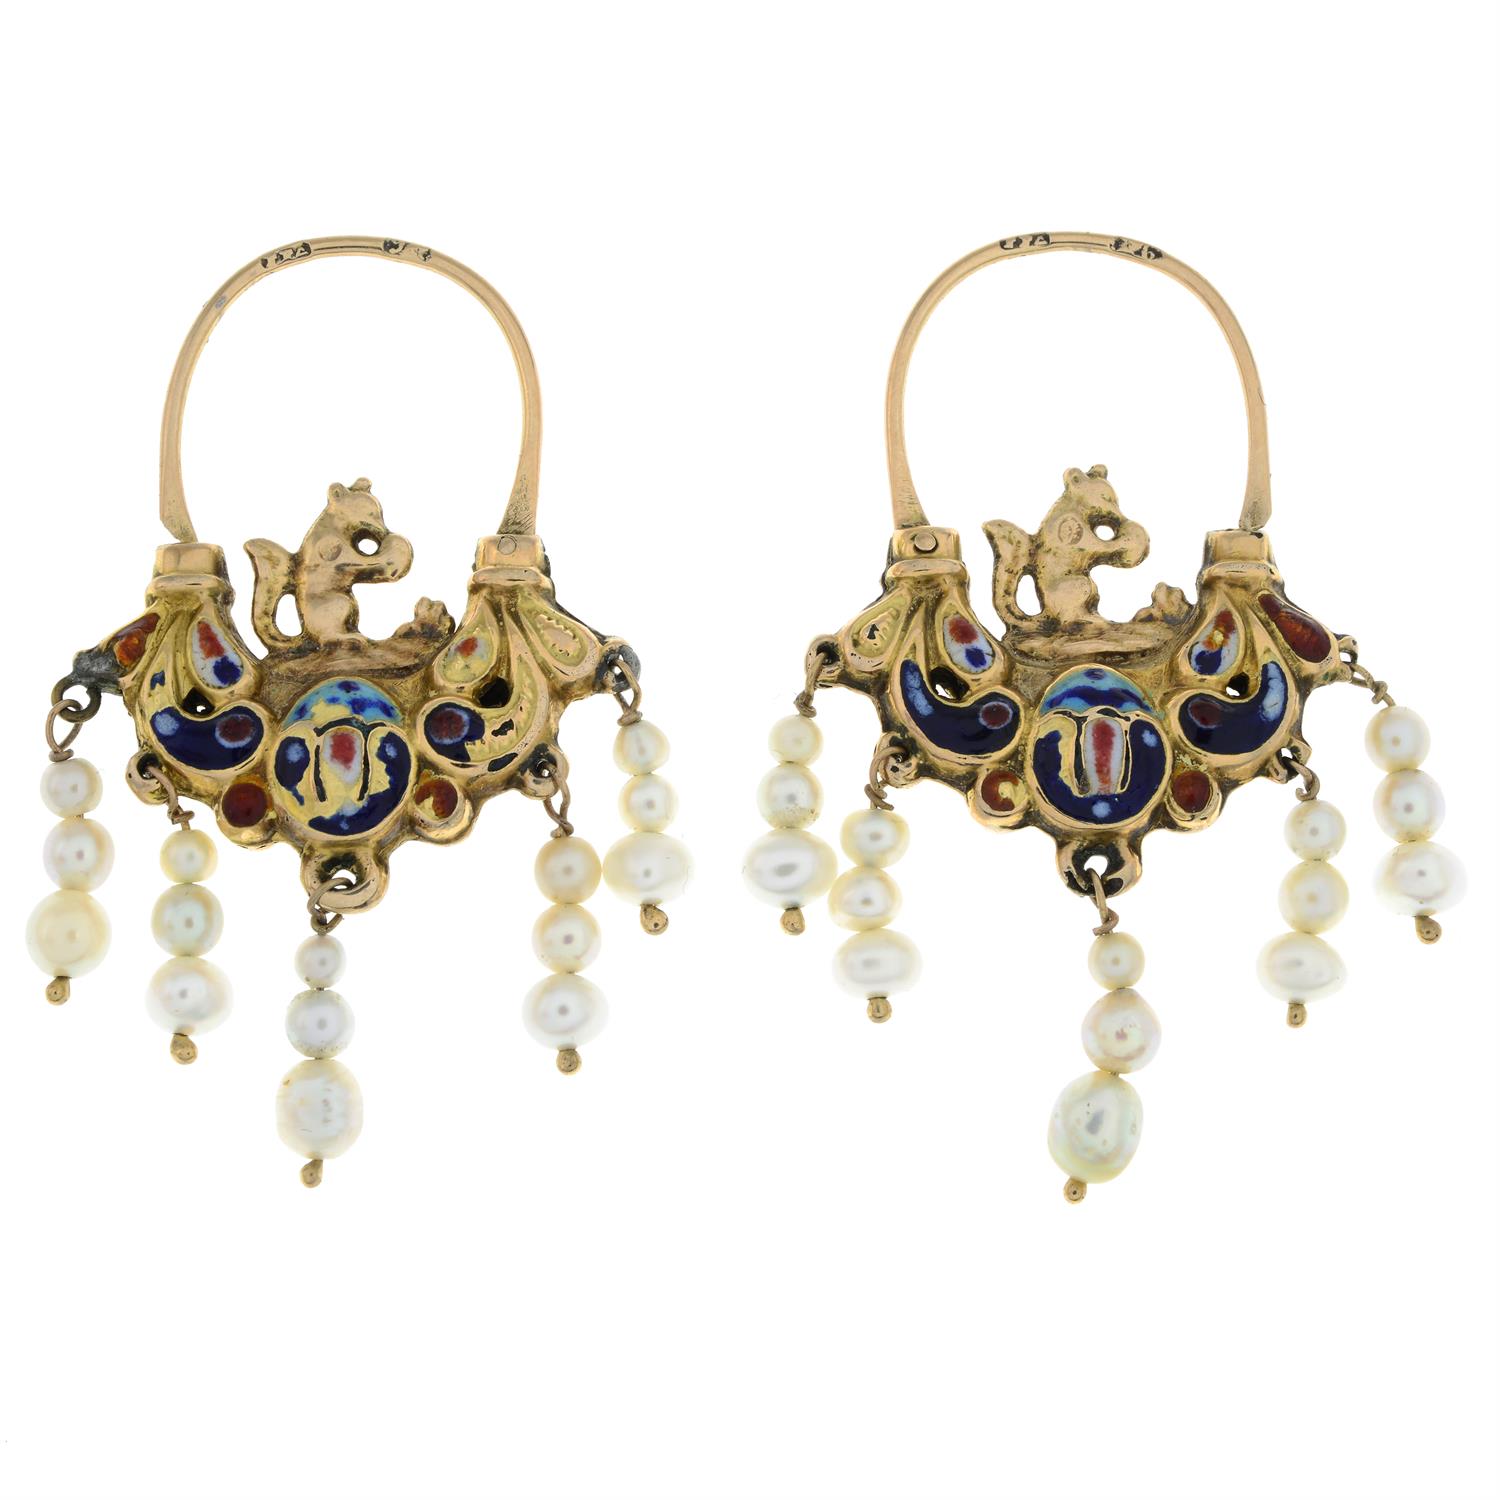 19th century gold enamel and cultured pearl earrings - Image 2 of 3